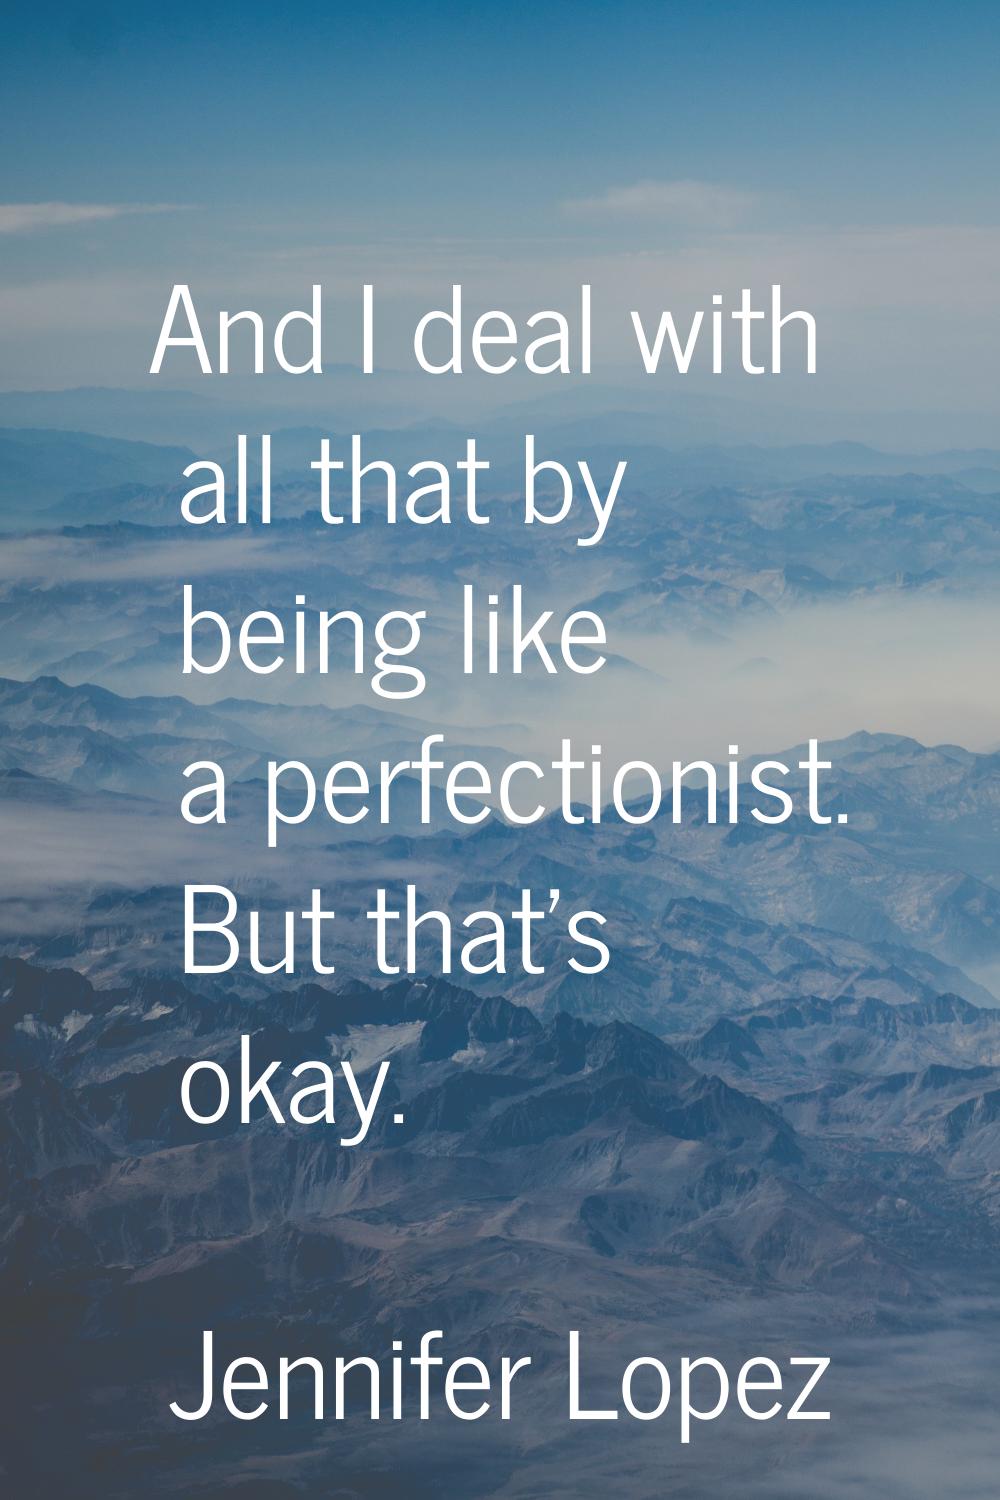 And I deal with all that by being like a perfectionist. But that's okay.